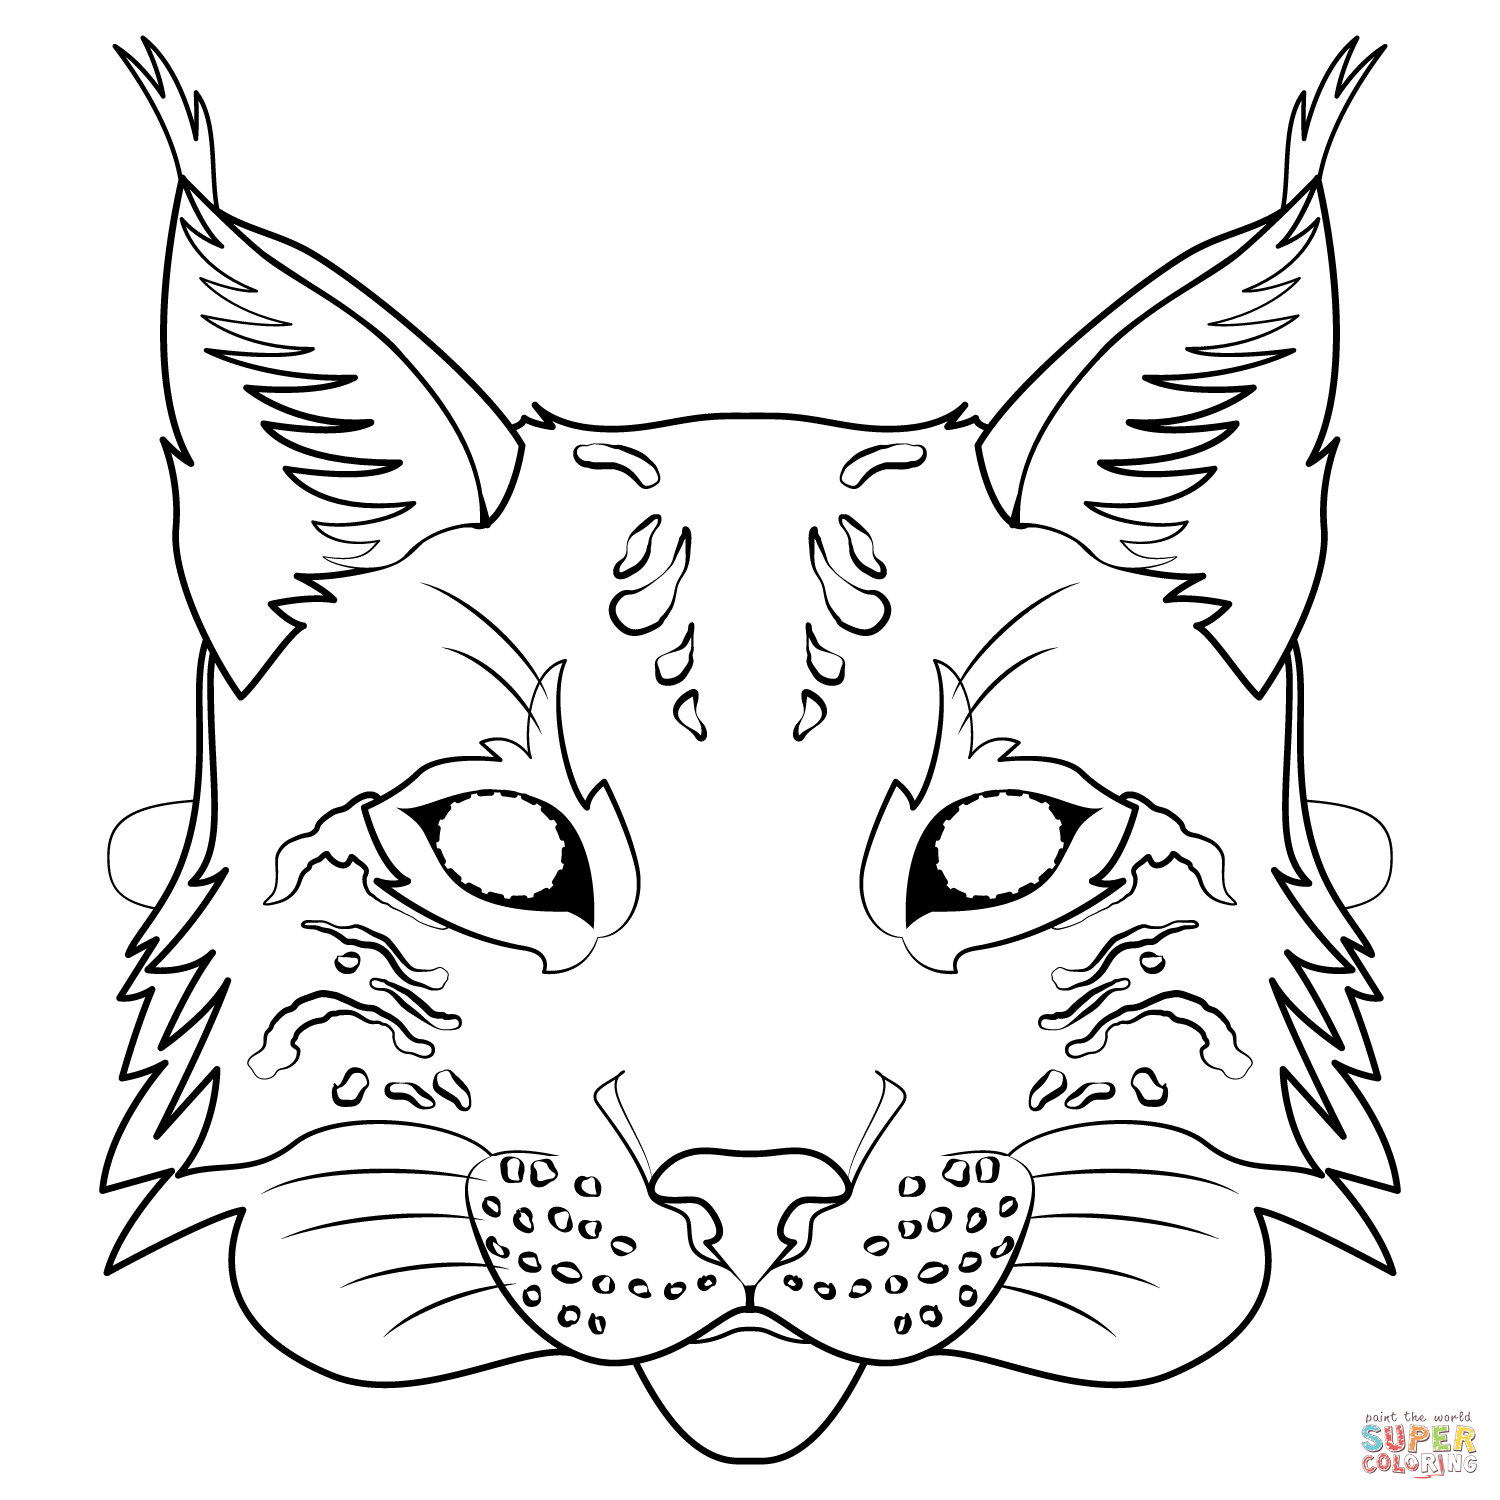 Lynx Mask coloring page | Free Printable Coloring Pages